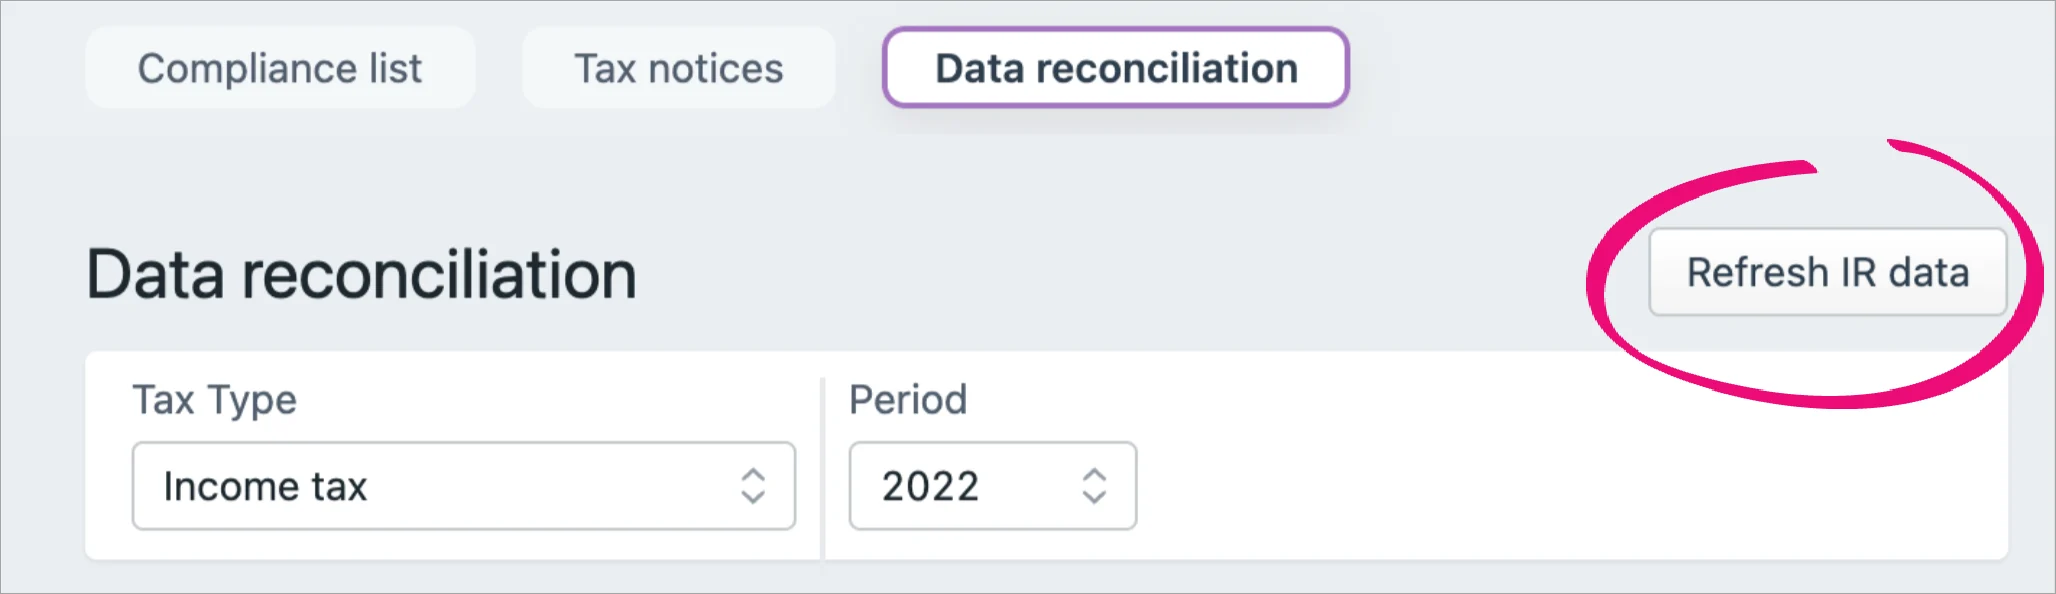 Refresh IR data button highlighted to the right of the Data reconciliation page title.